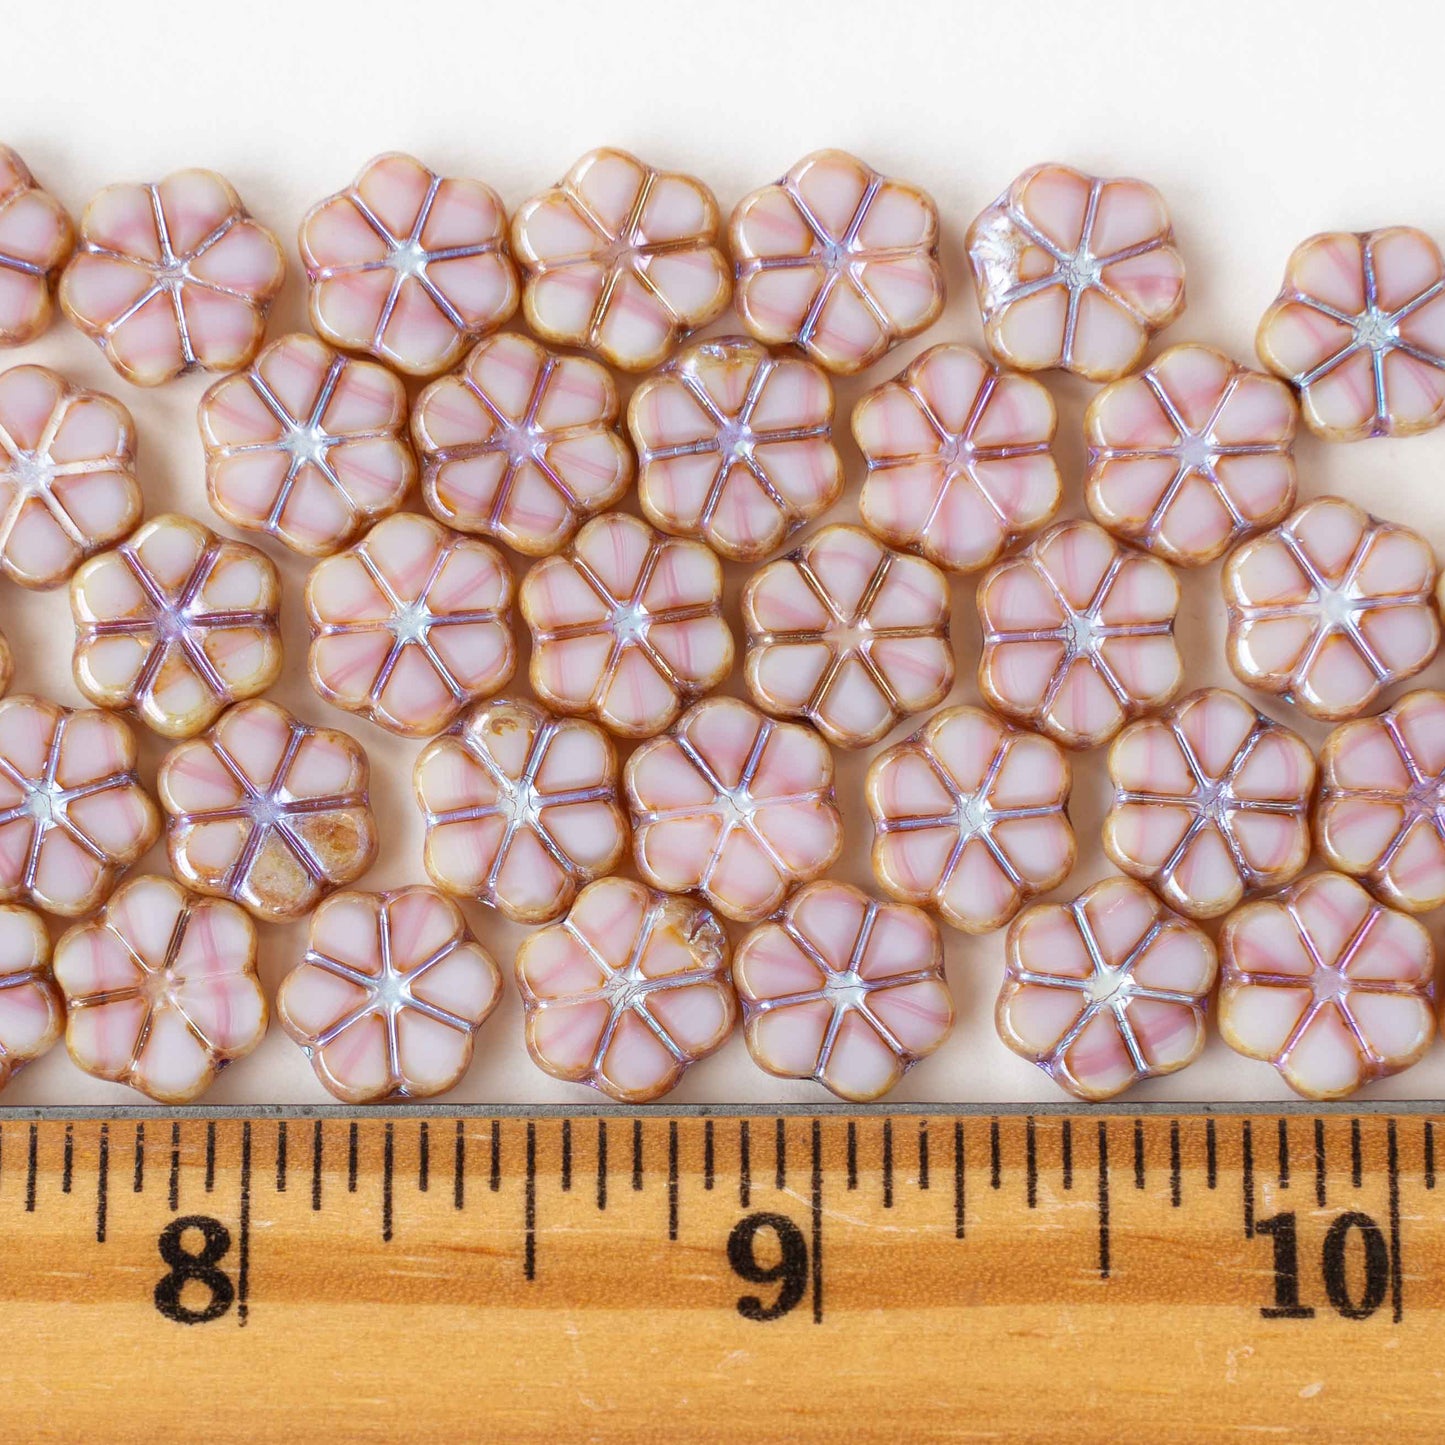 10mm Forget Me Not Flower Beads - Silky Pink - 10 Beads